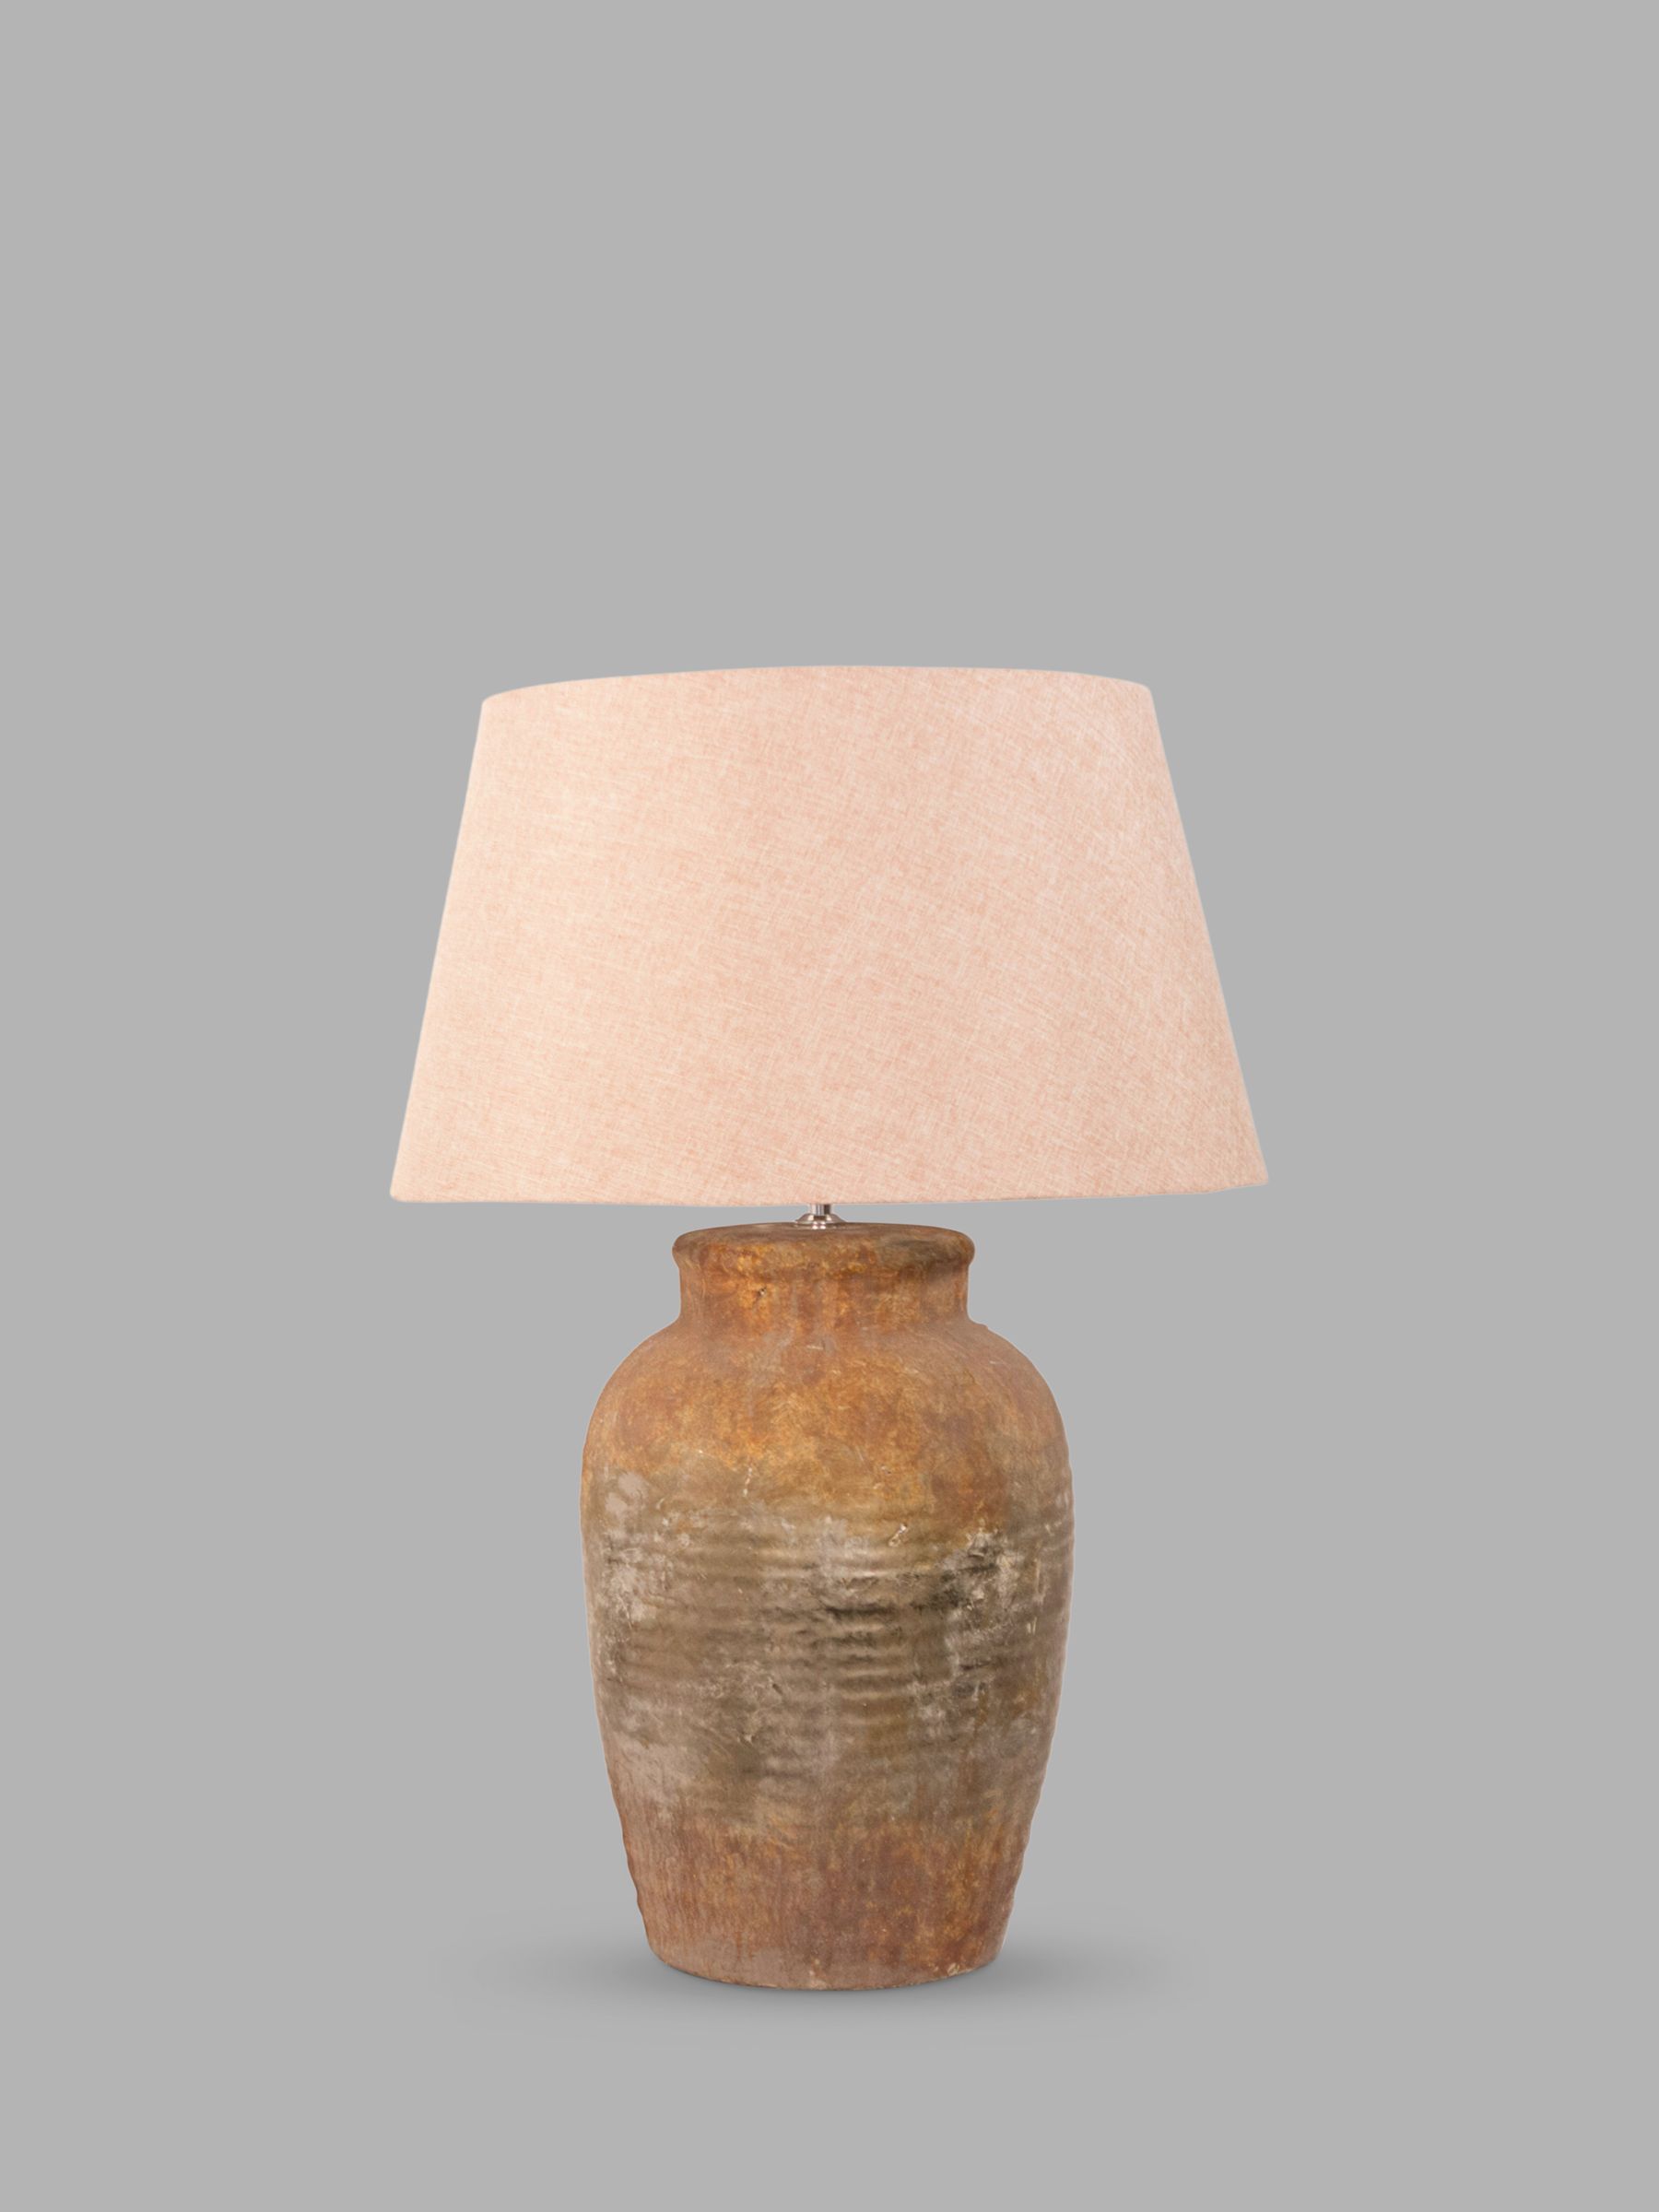 Photo of One.world birkdale rustic base linen shade table lamp stone